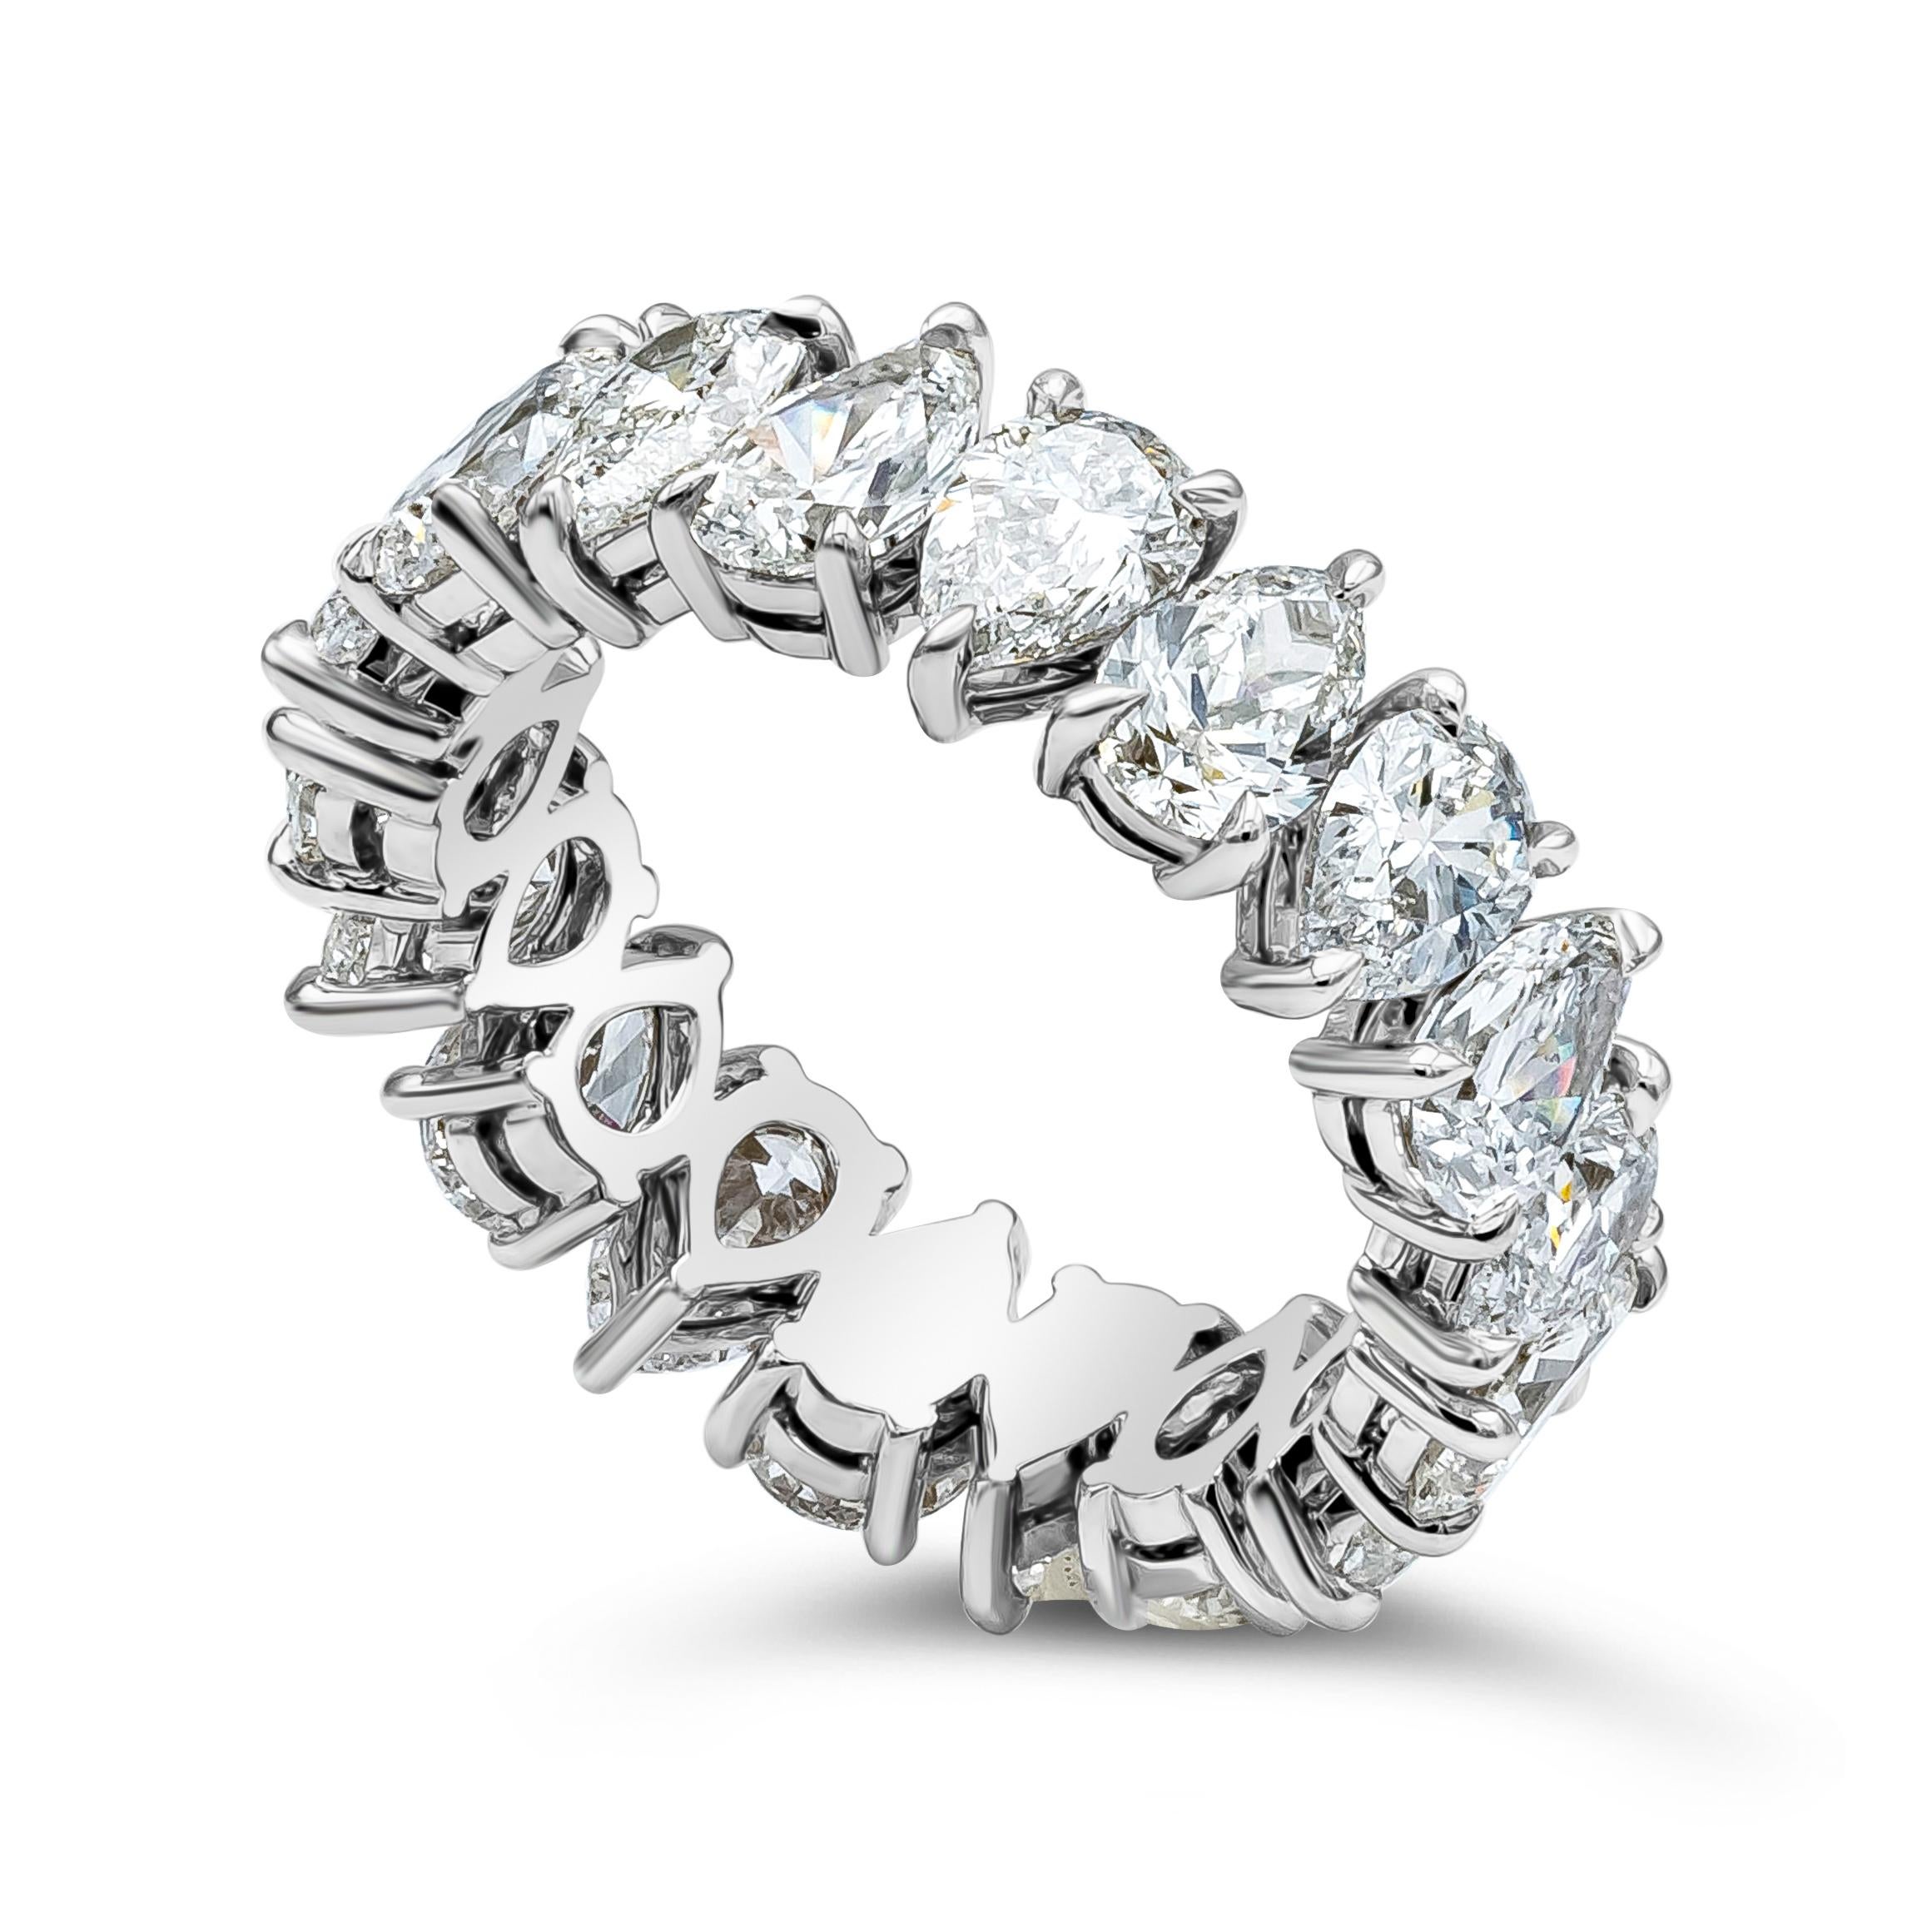 A brilliant and unique eternity band style, featuring 18 brilliant pear shape diamonds weighing 5.52 carats total with E-F color and VS-SI clarity. Set on platinum. Size 6 US.

Roman Malakov is a custom house, specializing in creating anything you